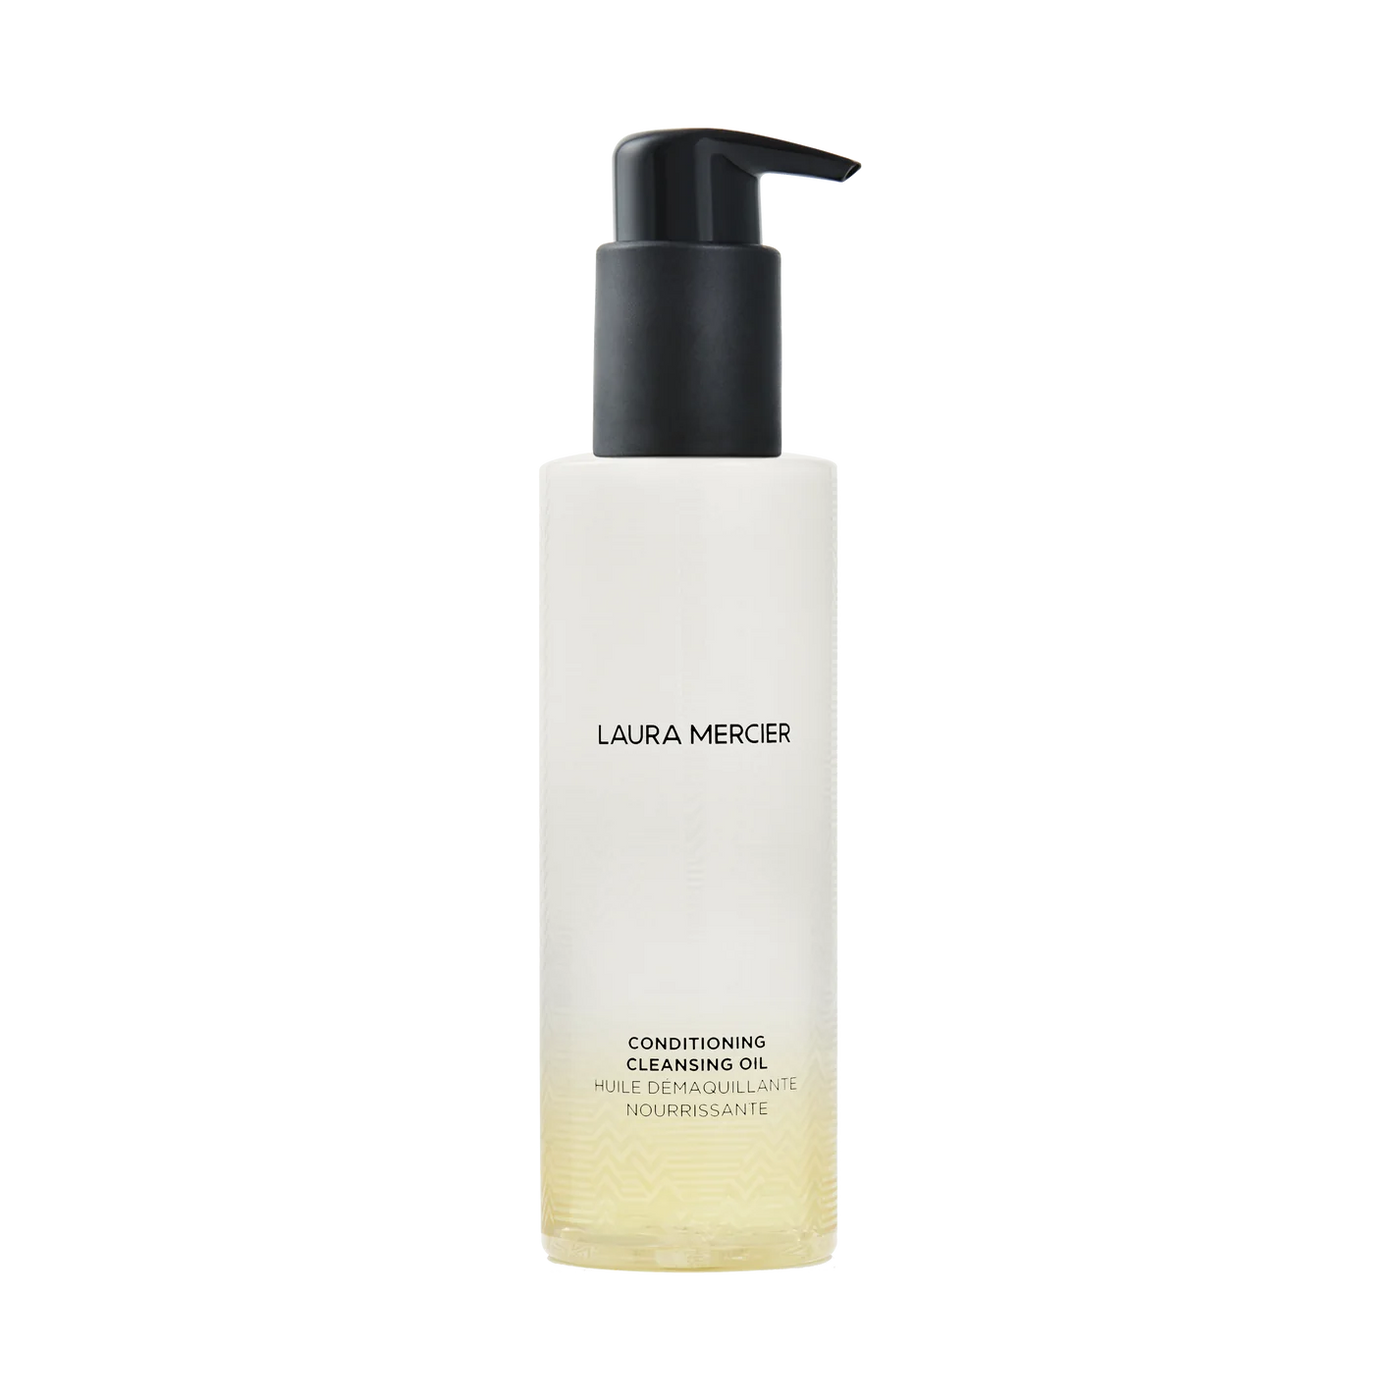 Conditioning Cleansing Oil 5 fl. oz